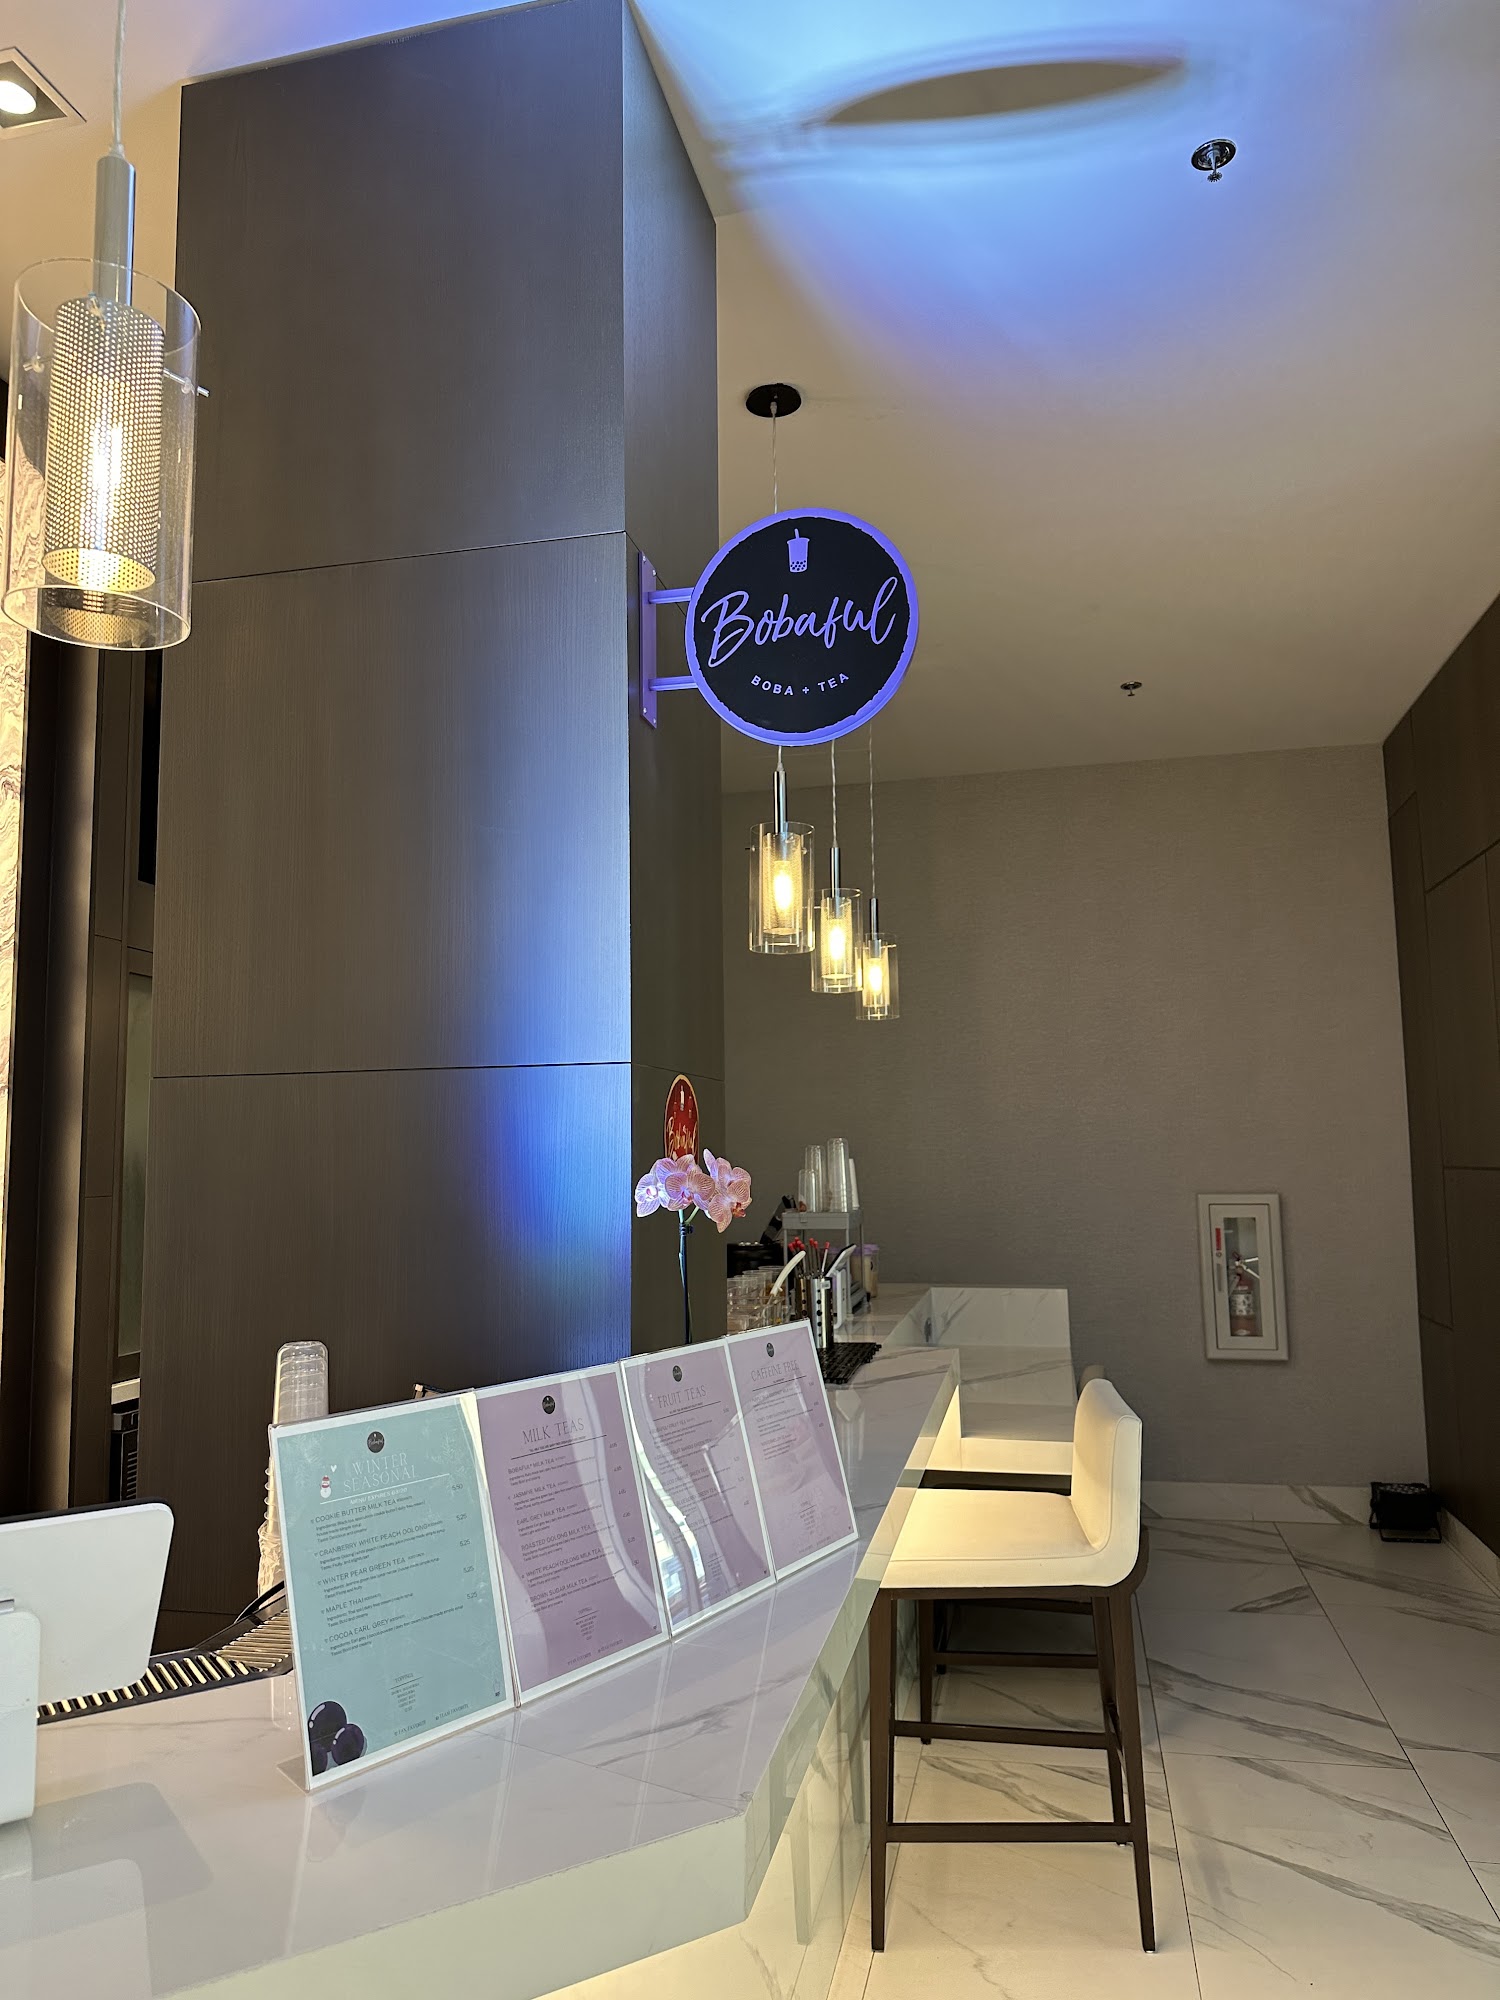 Bobaful - The Courtyard By Marriott